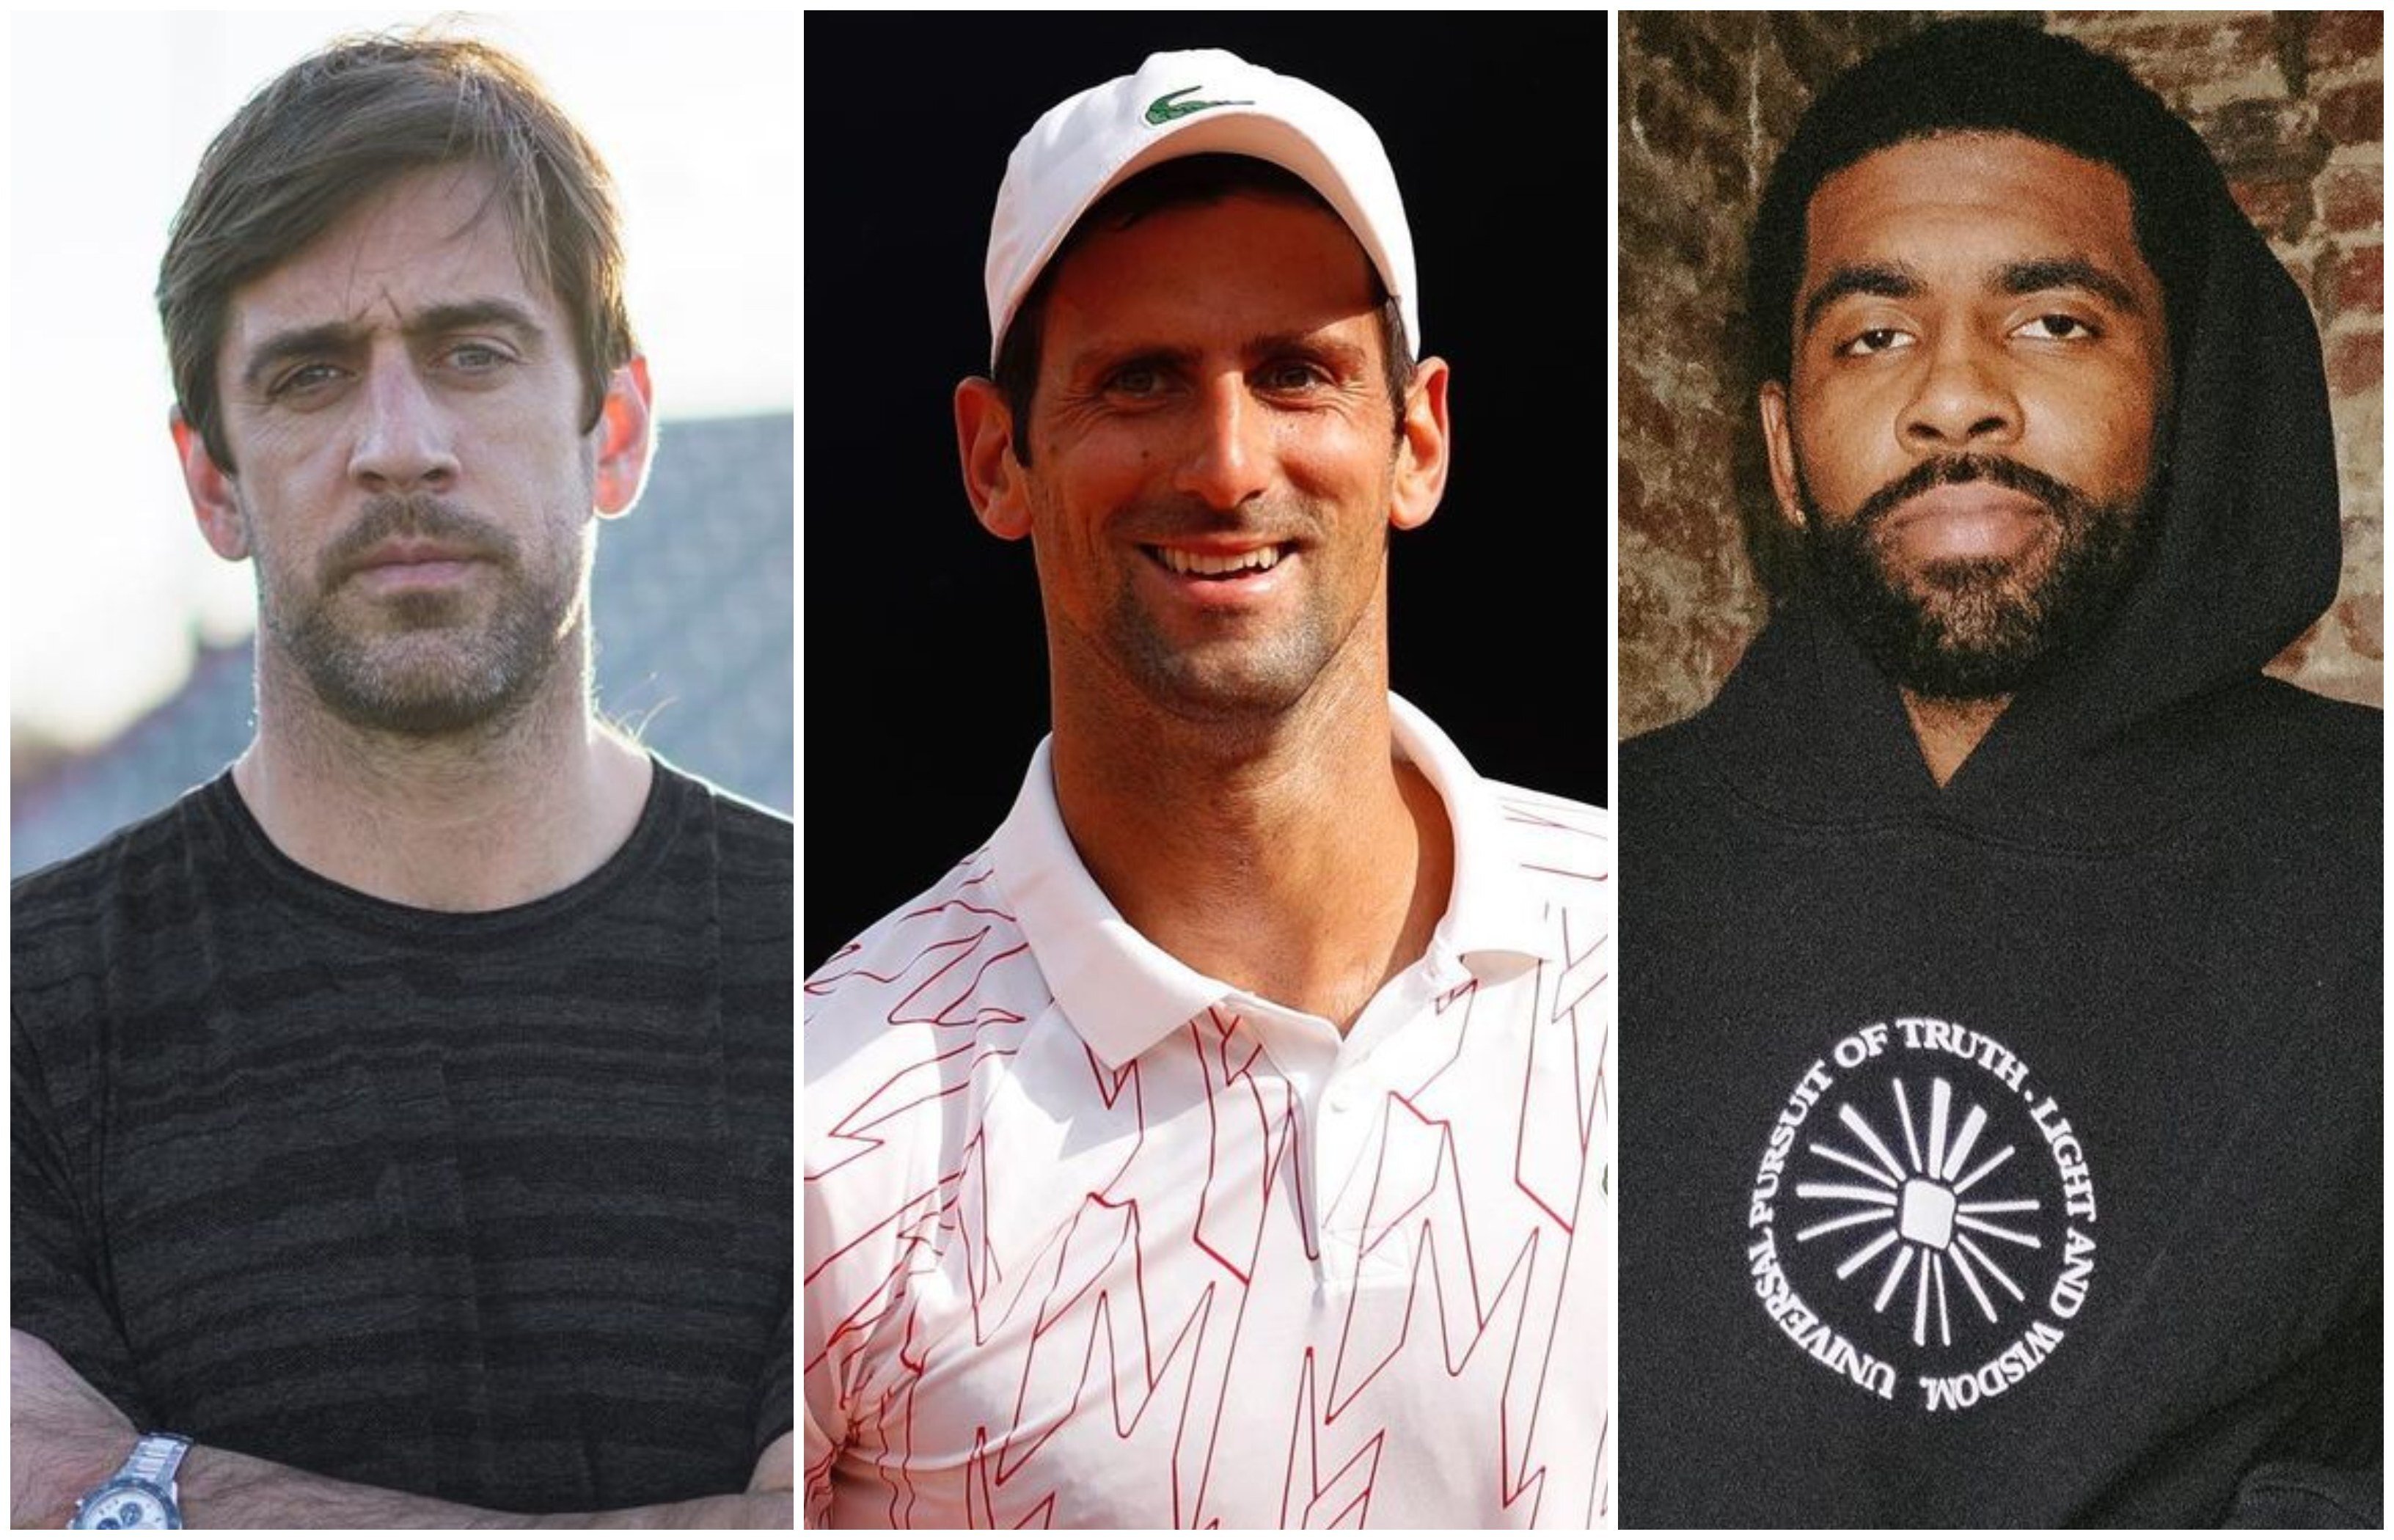 Novak Djokovic and 5 other athletes who refused the Covid-19 vaccine – from  NFL quarterback Aaron Rodgers to NBA player Kyrie Irving and golfer Bryson  DeChambeau